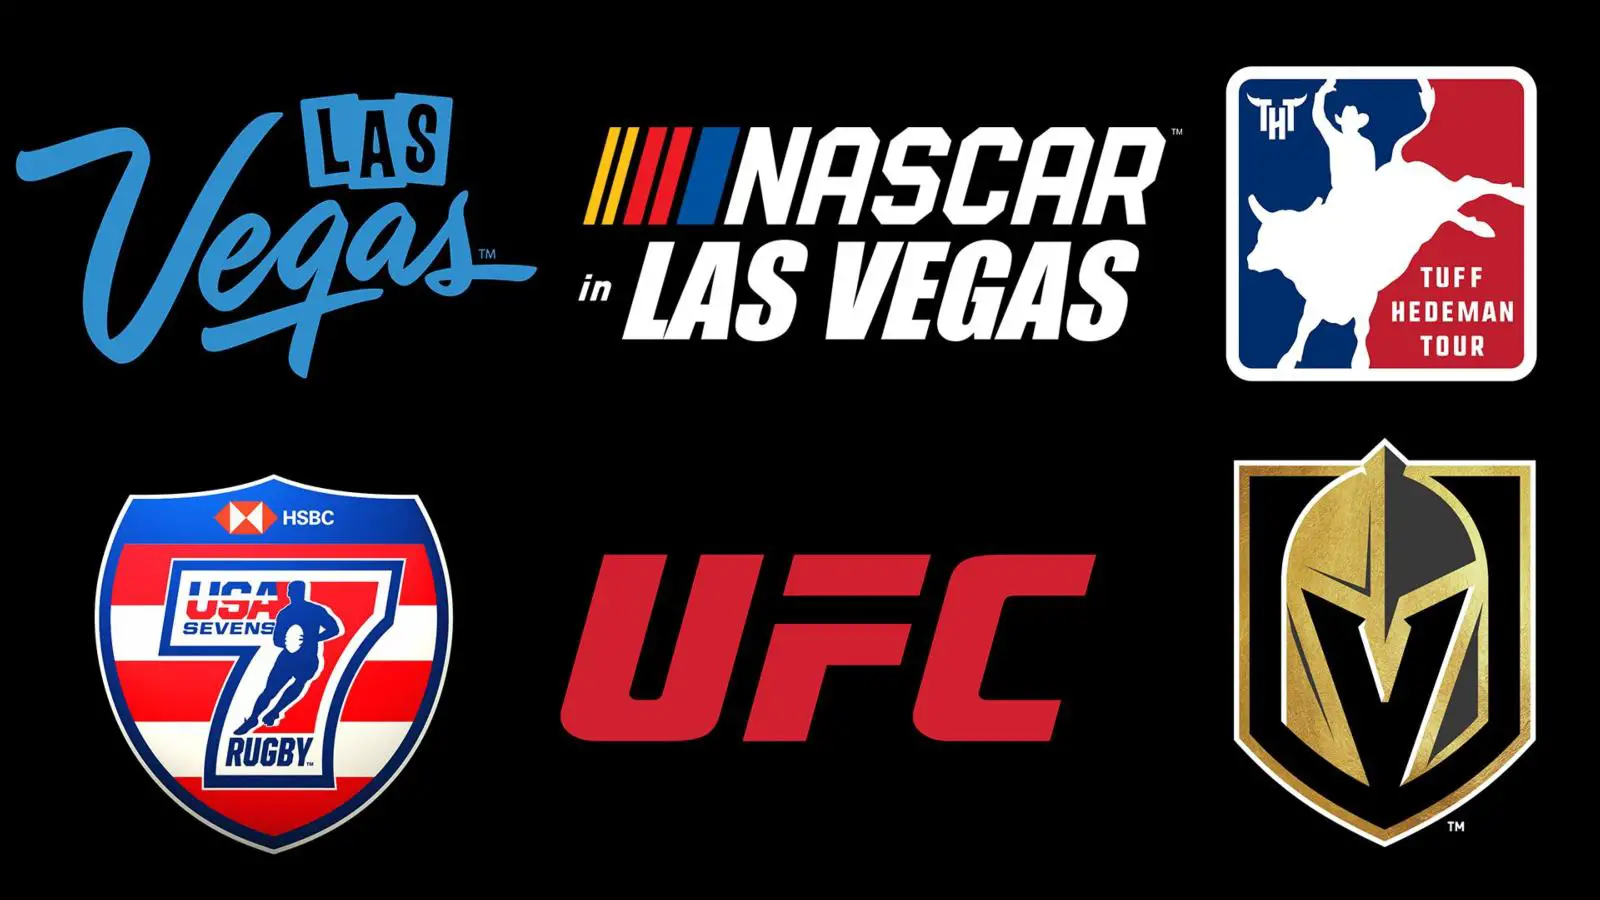 Enter to win the Ultimate Sports Las Vegas Weekend. Enter for a chance to be part of the fun!